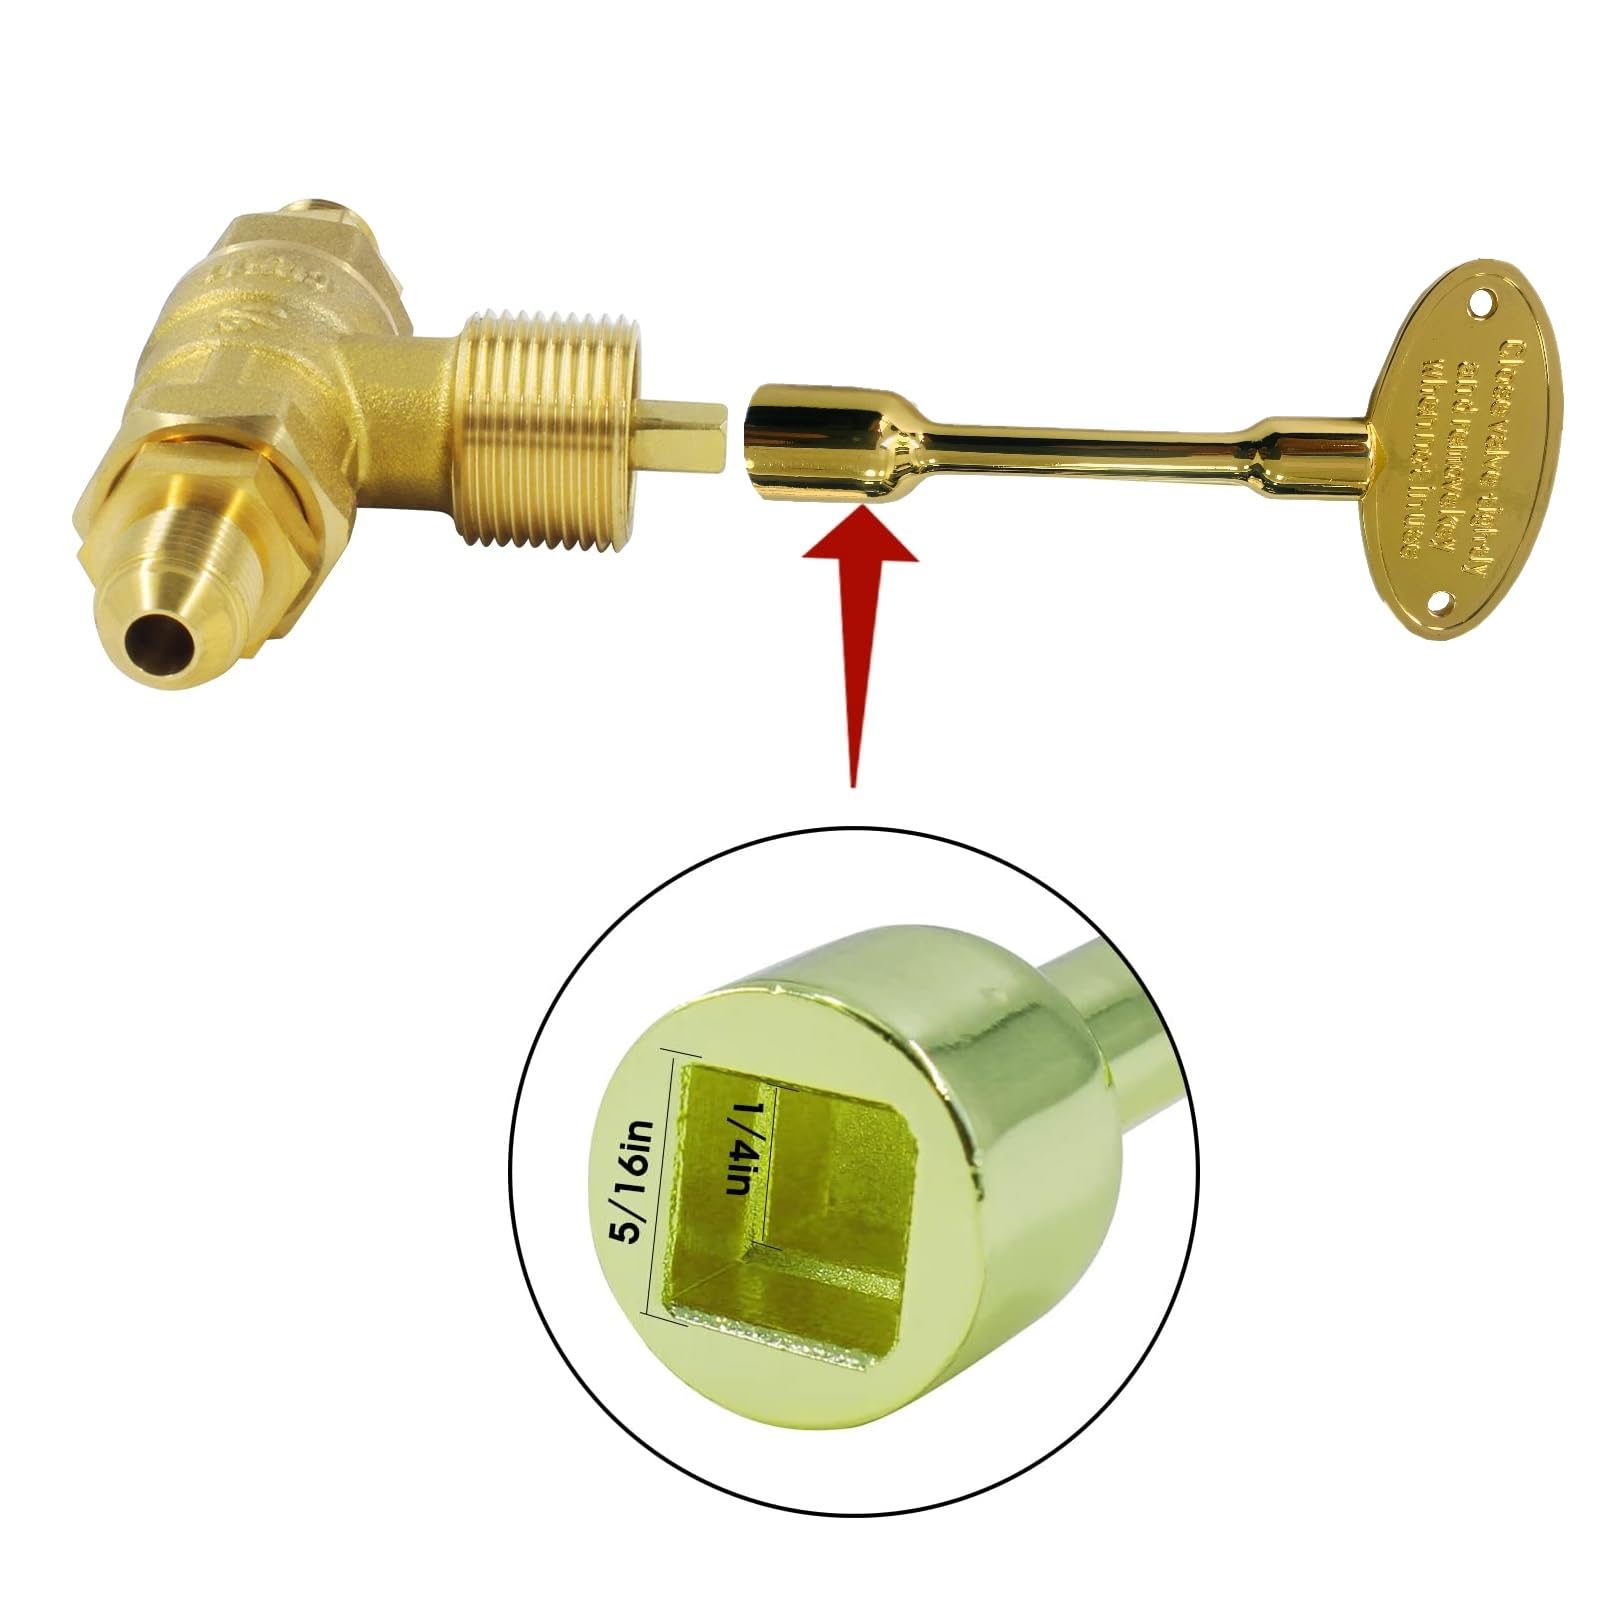 MCAMPAS Replacement Parts Gas Valve Key for Gas Fire Pits and Fireplaces, Polished Brass Replacement Gas Key Fits 1/4" Turn Ball Valve 3” Long of 2 Pack